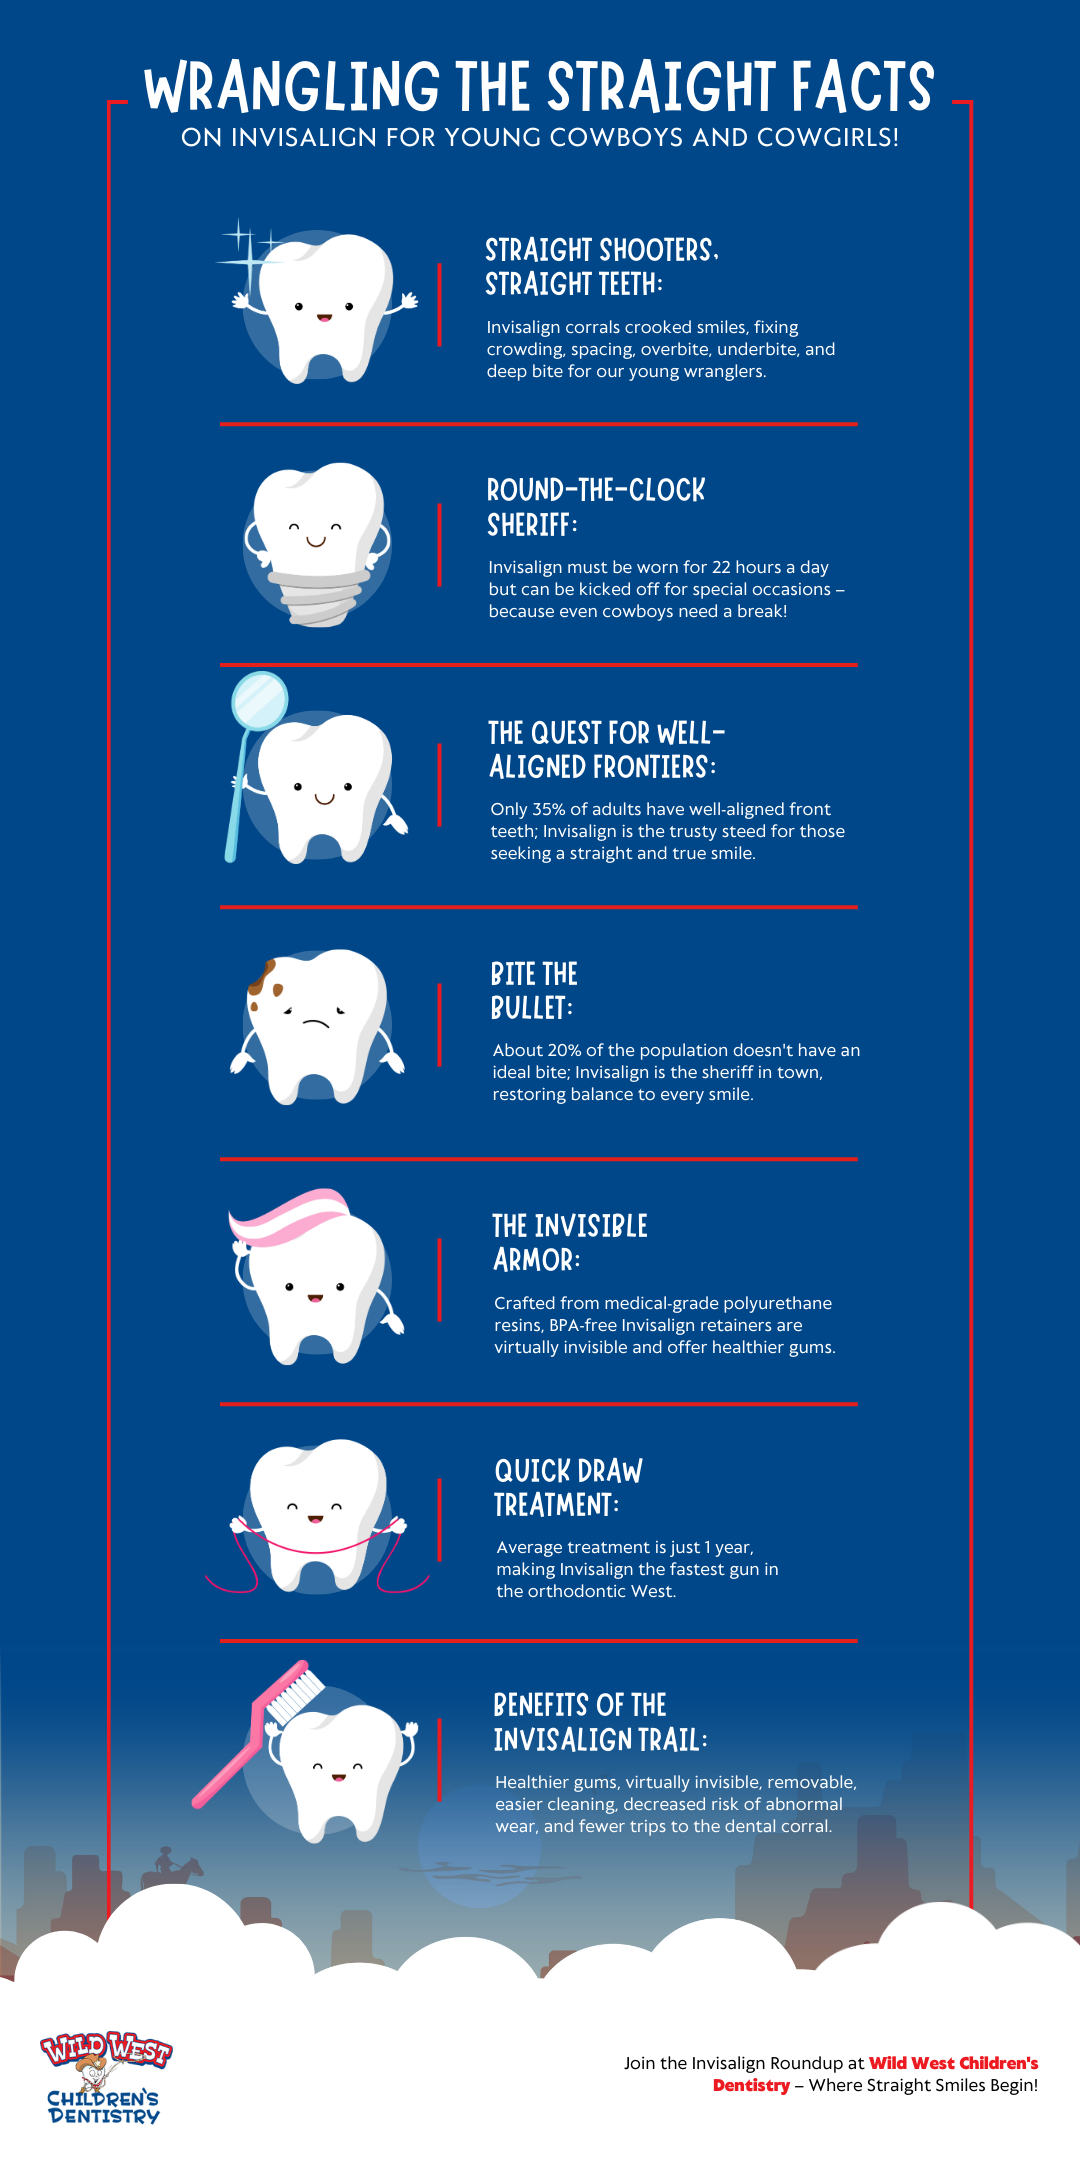 M42459 - Wild West Children's Dentistry - Infographic - Wrangling the Straight Facts on Invisalign for Young Cowboys and Cowgirls.png